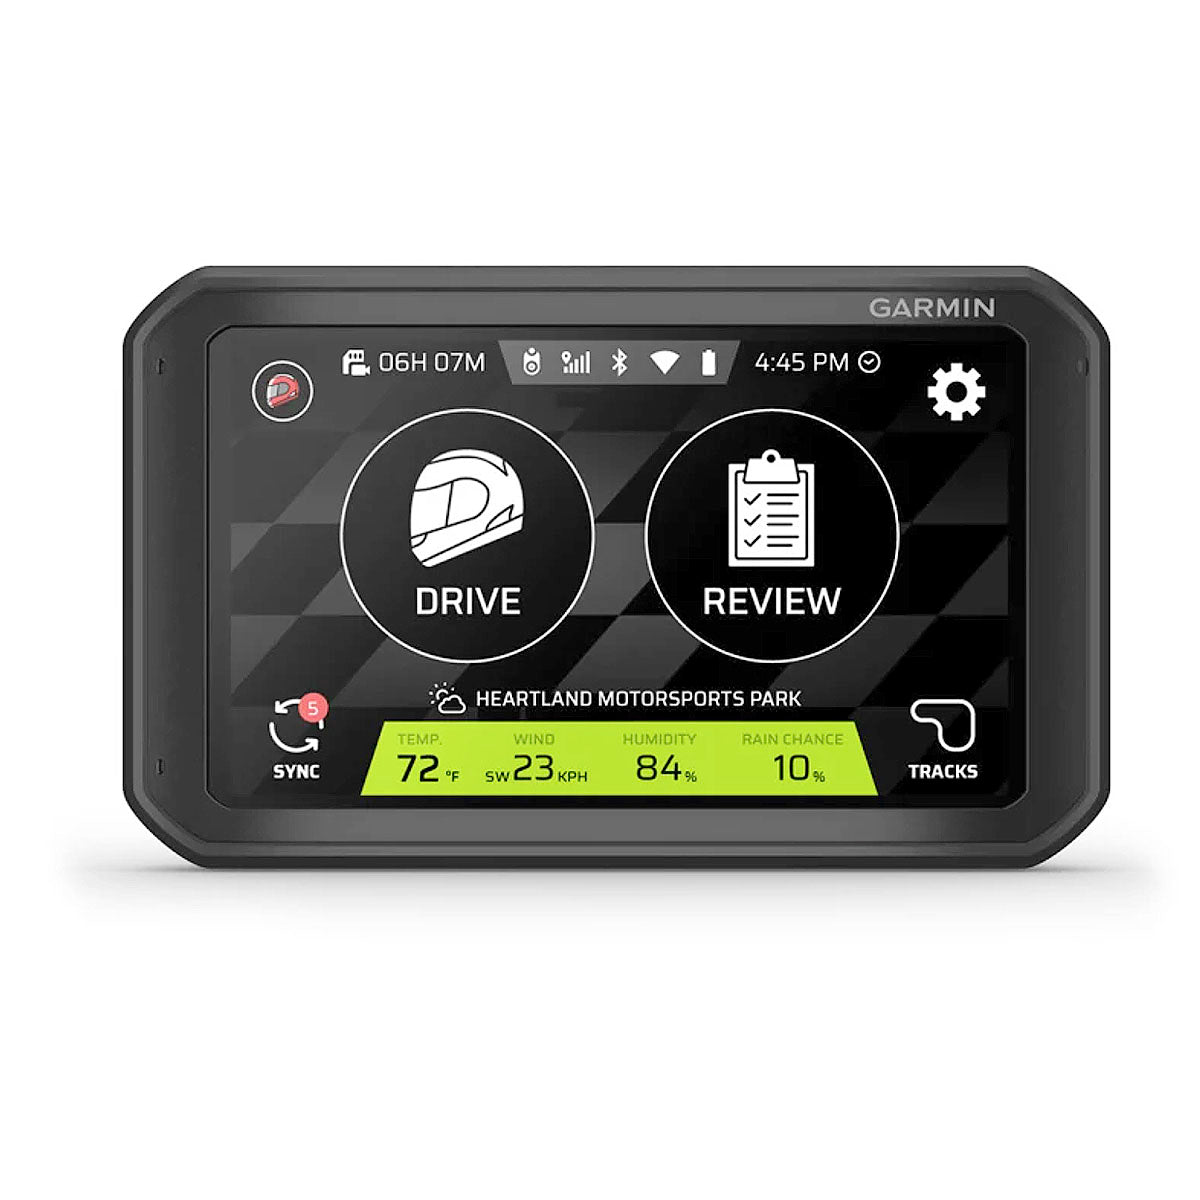 Garmin Catalyst device providing real-time driving feedback.